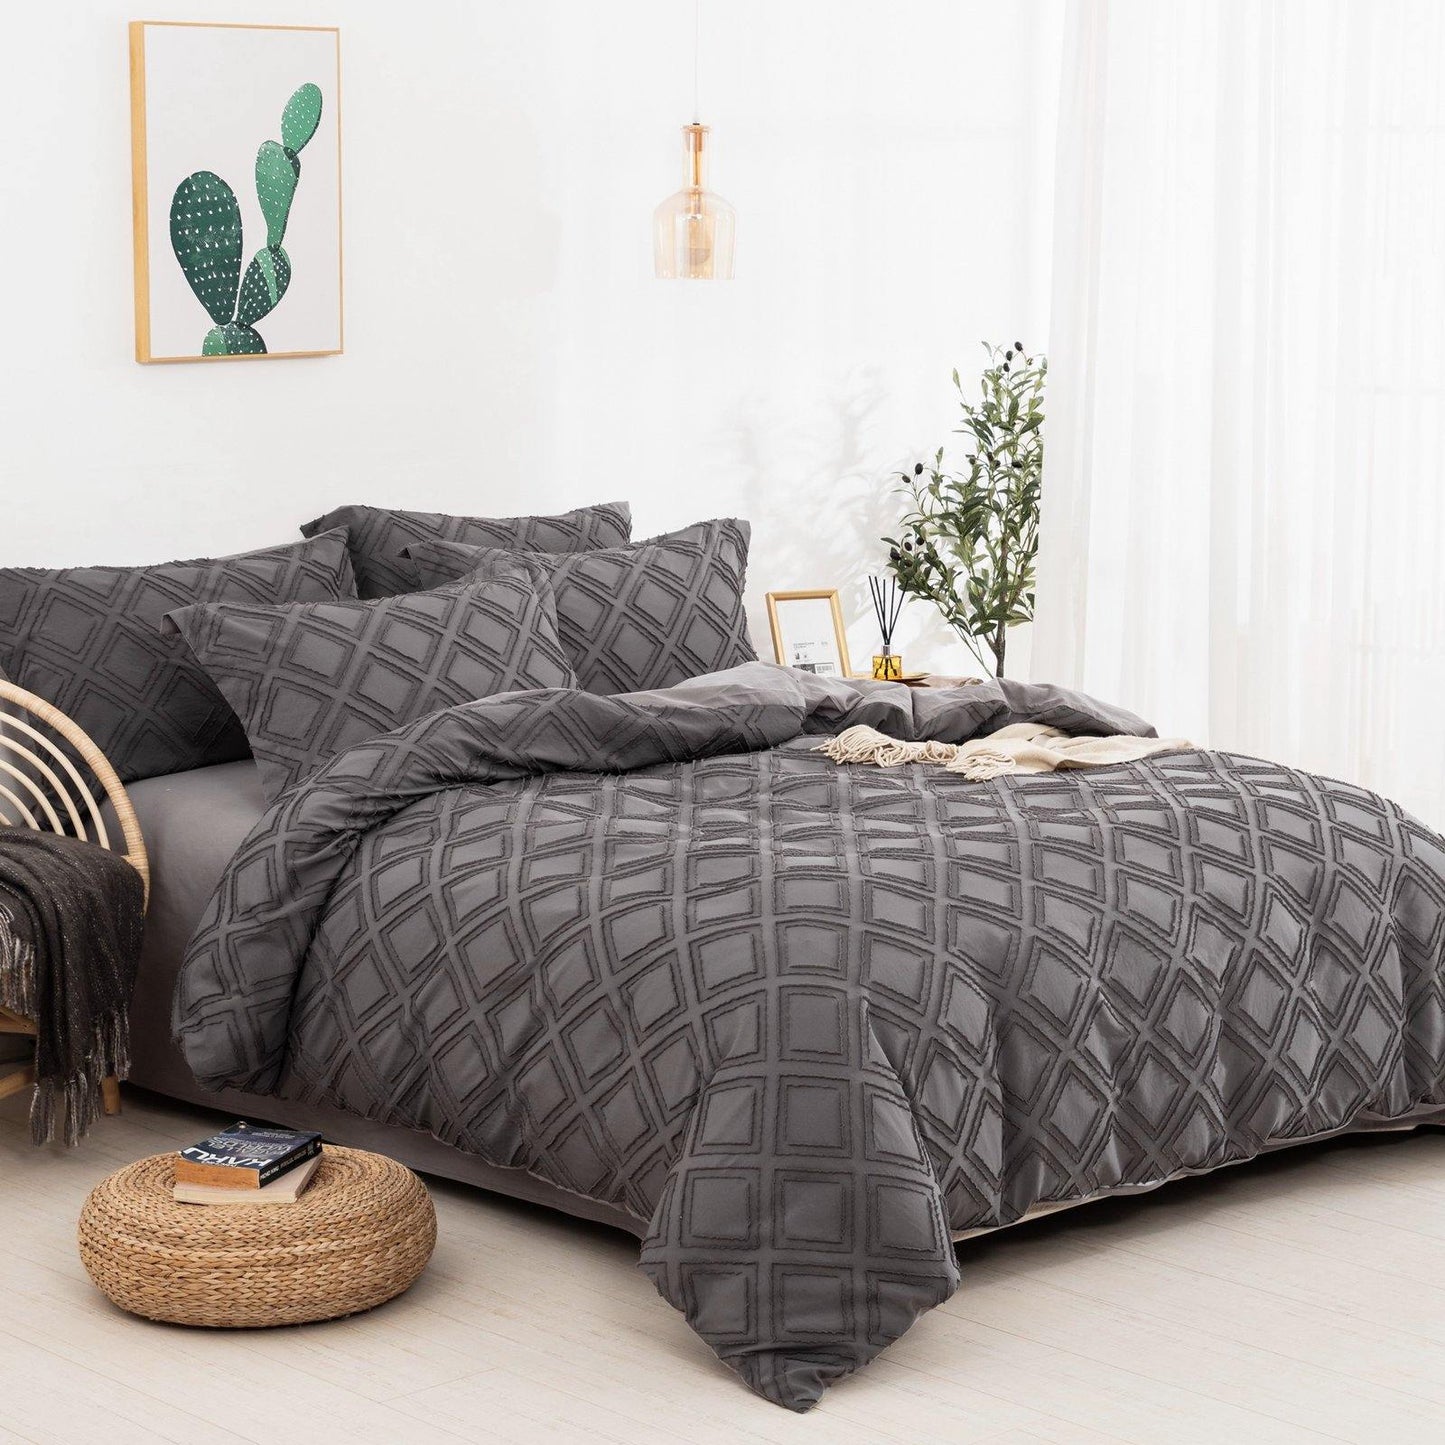 WONGS BEDDING 100% cotton gray black chocolate block Comforter set 3 Pieces Bedding Comforter with 2 Pillow Cases suitable for the whole season - Wongs bedding